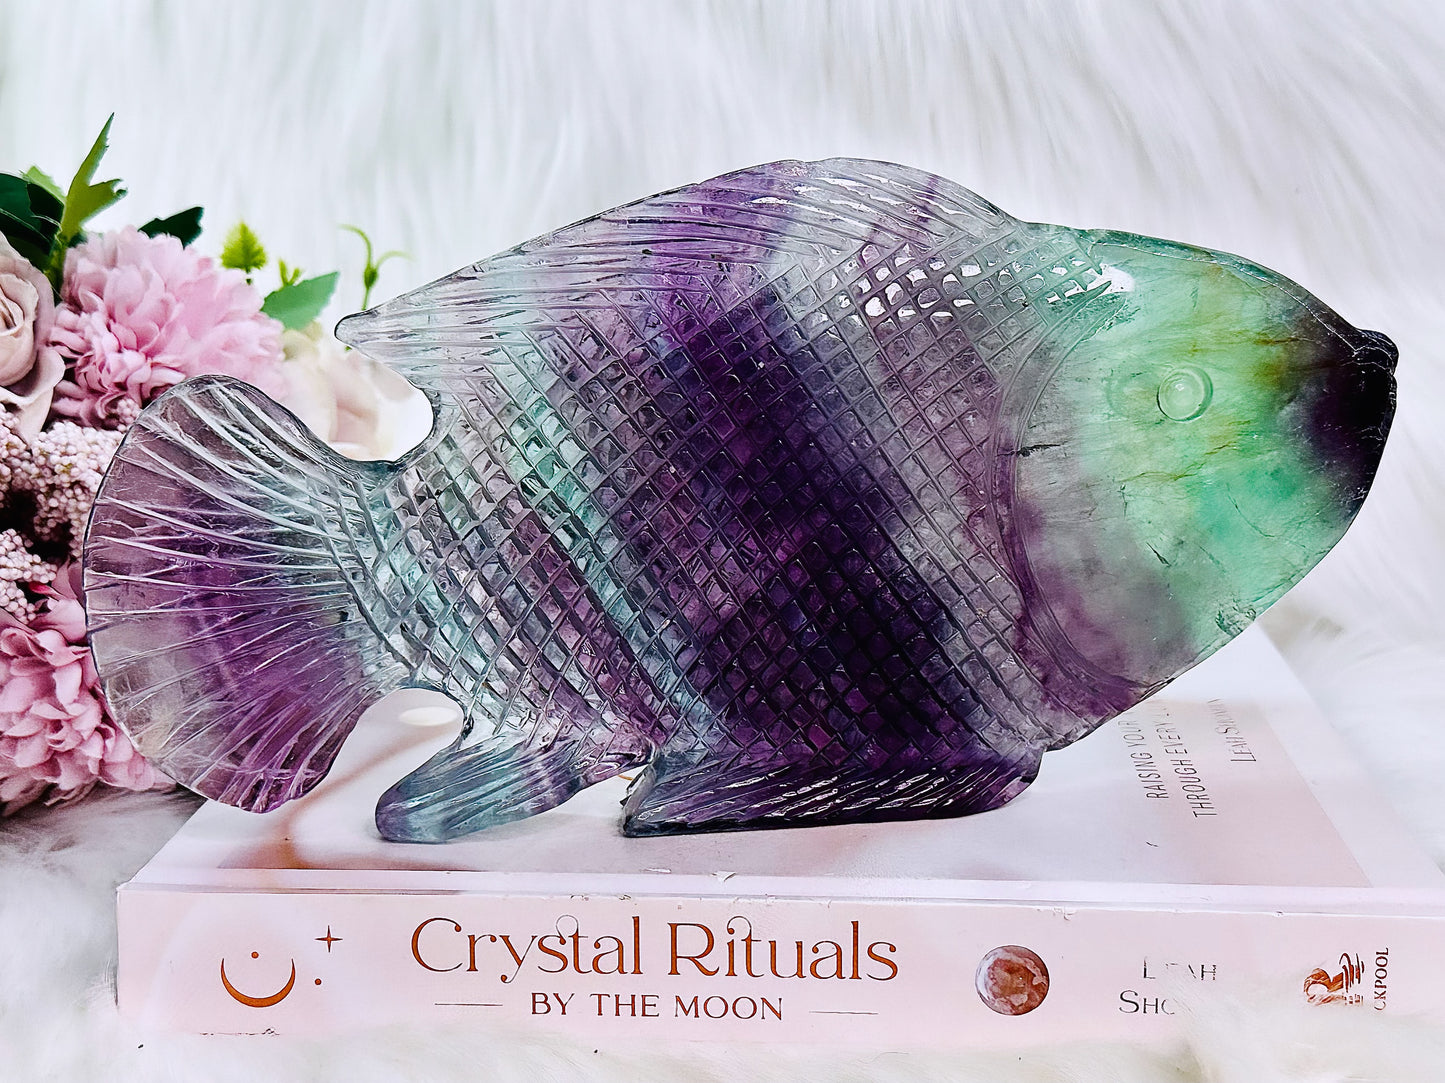 WOWWW!!!! Absolutely Magnificent Huge 23cm 784gram Carved To Perfection Stunning Rainbow Fluorite Fish ~ What A Masterpiece